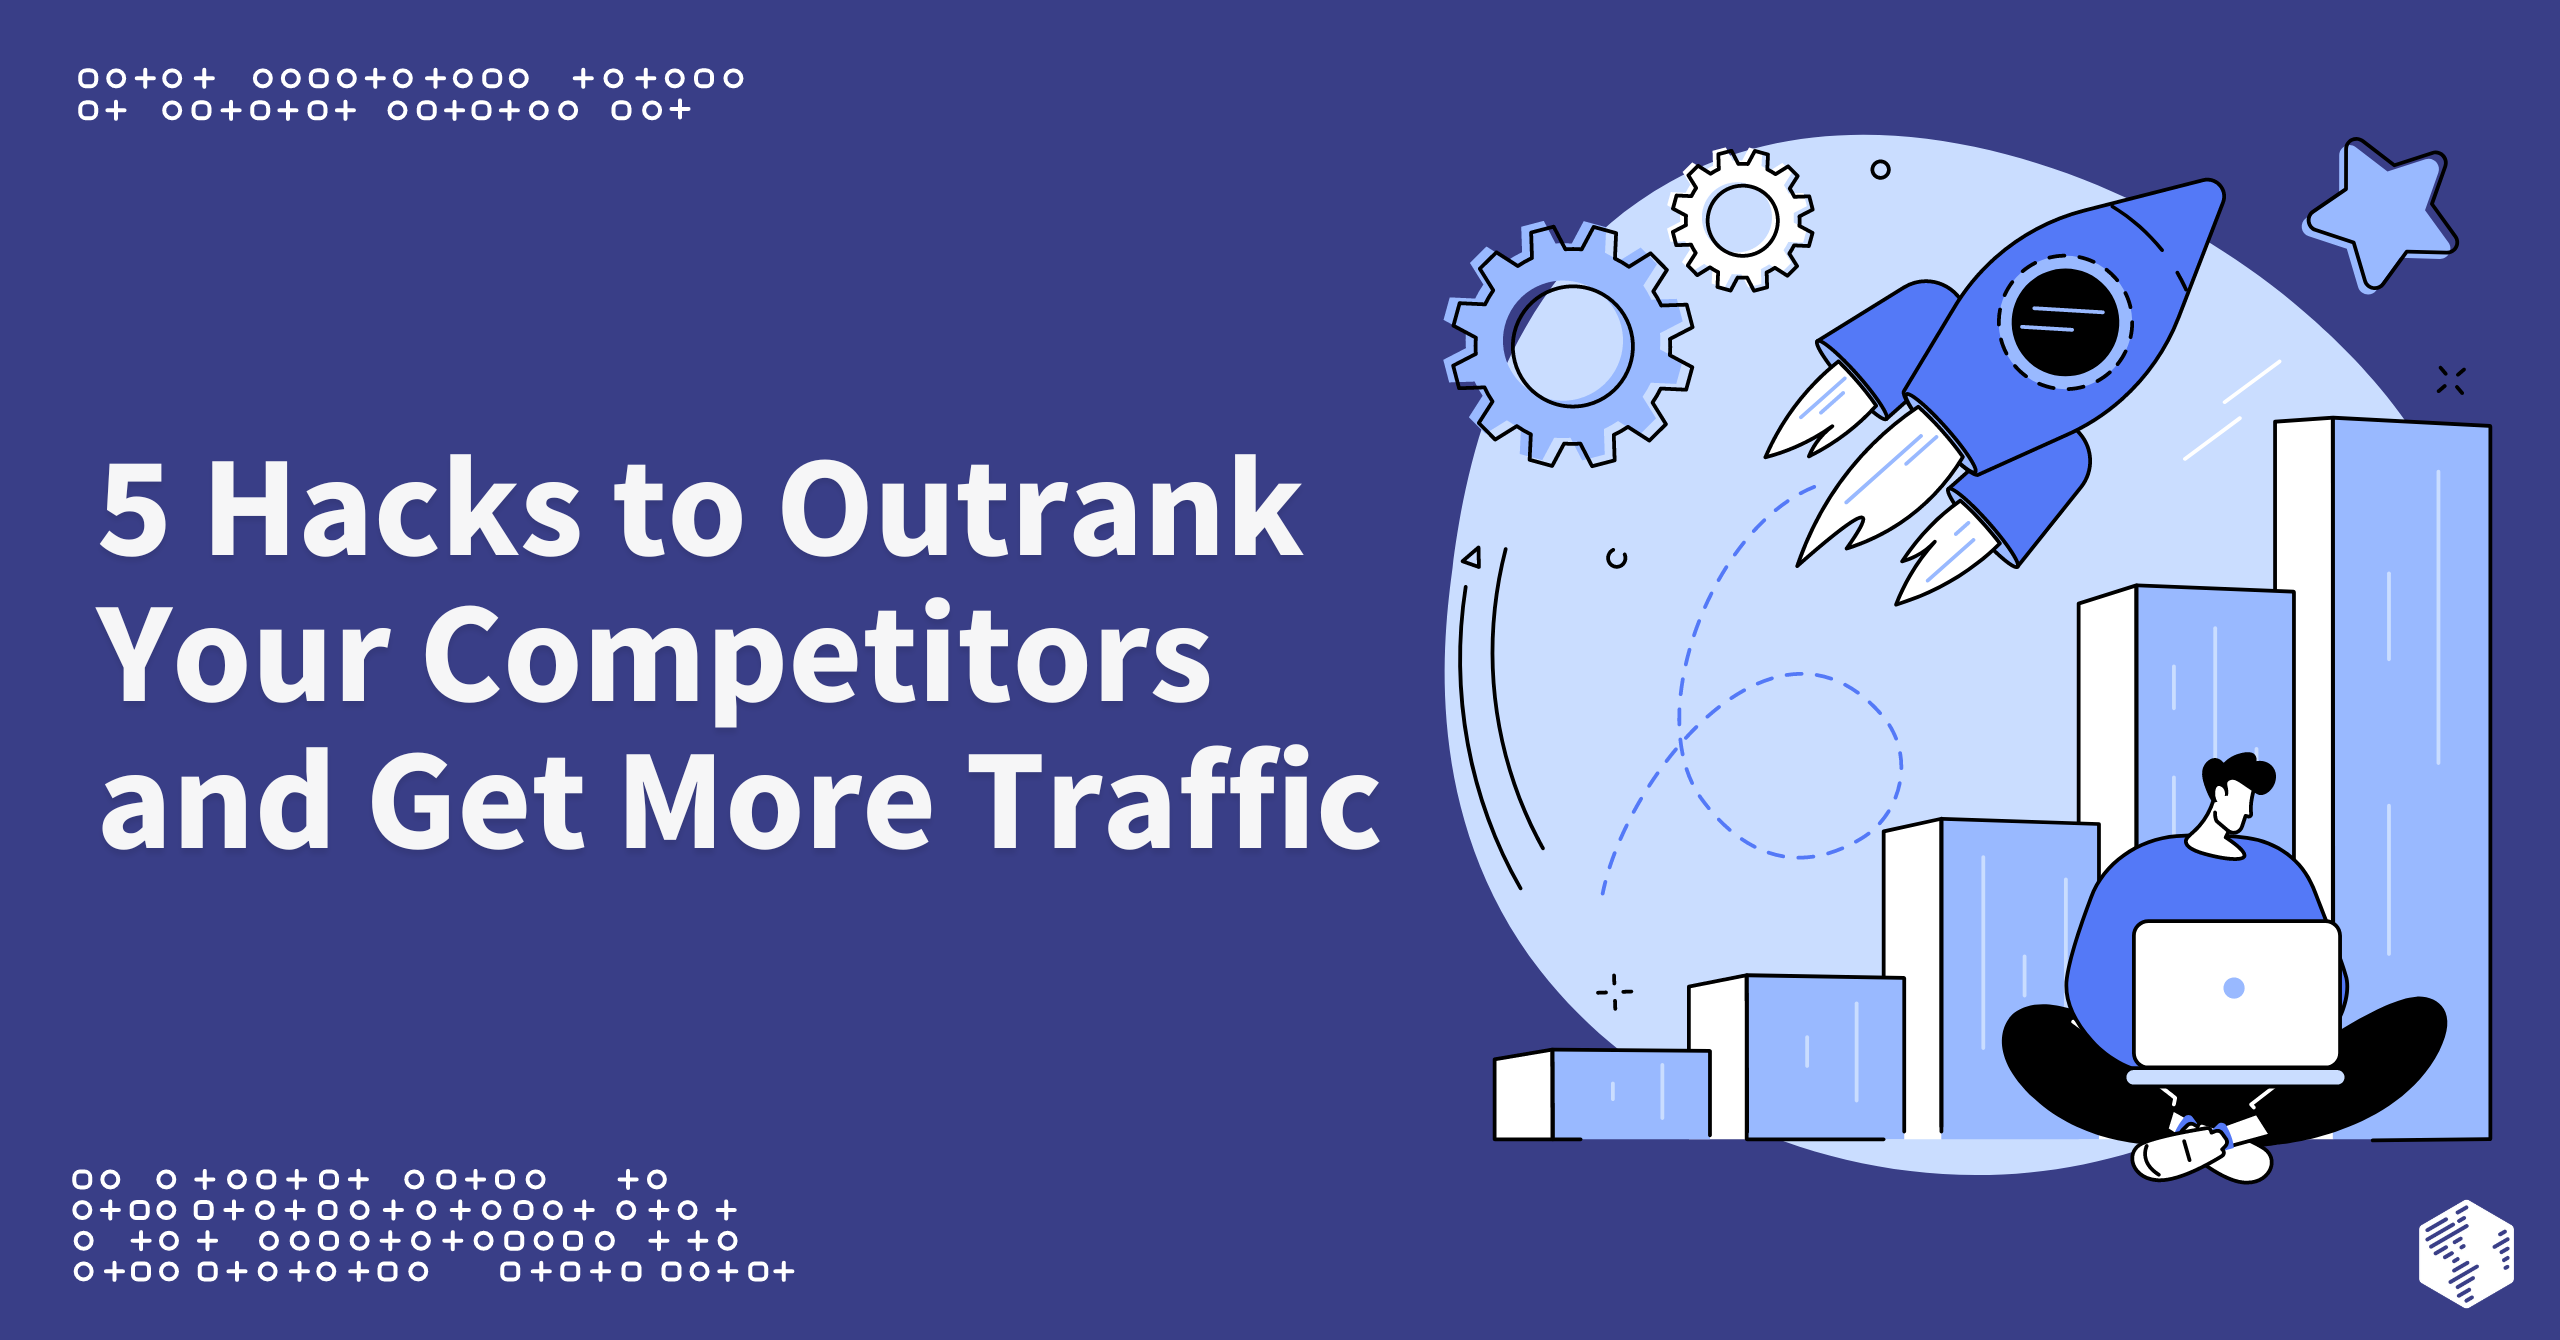 5 Hacks to Outrank Your Competitors and Get More Traffic